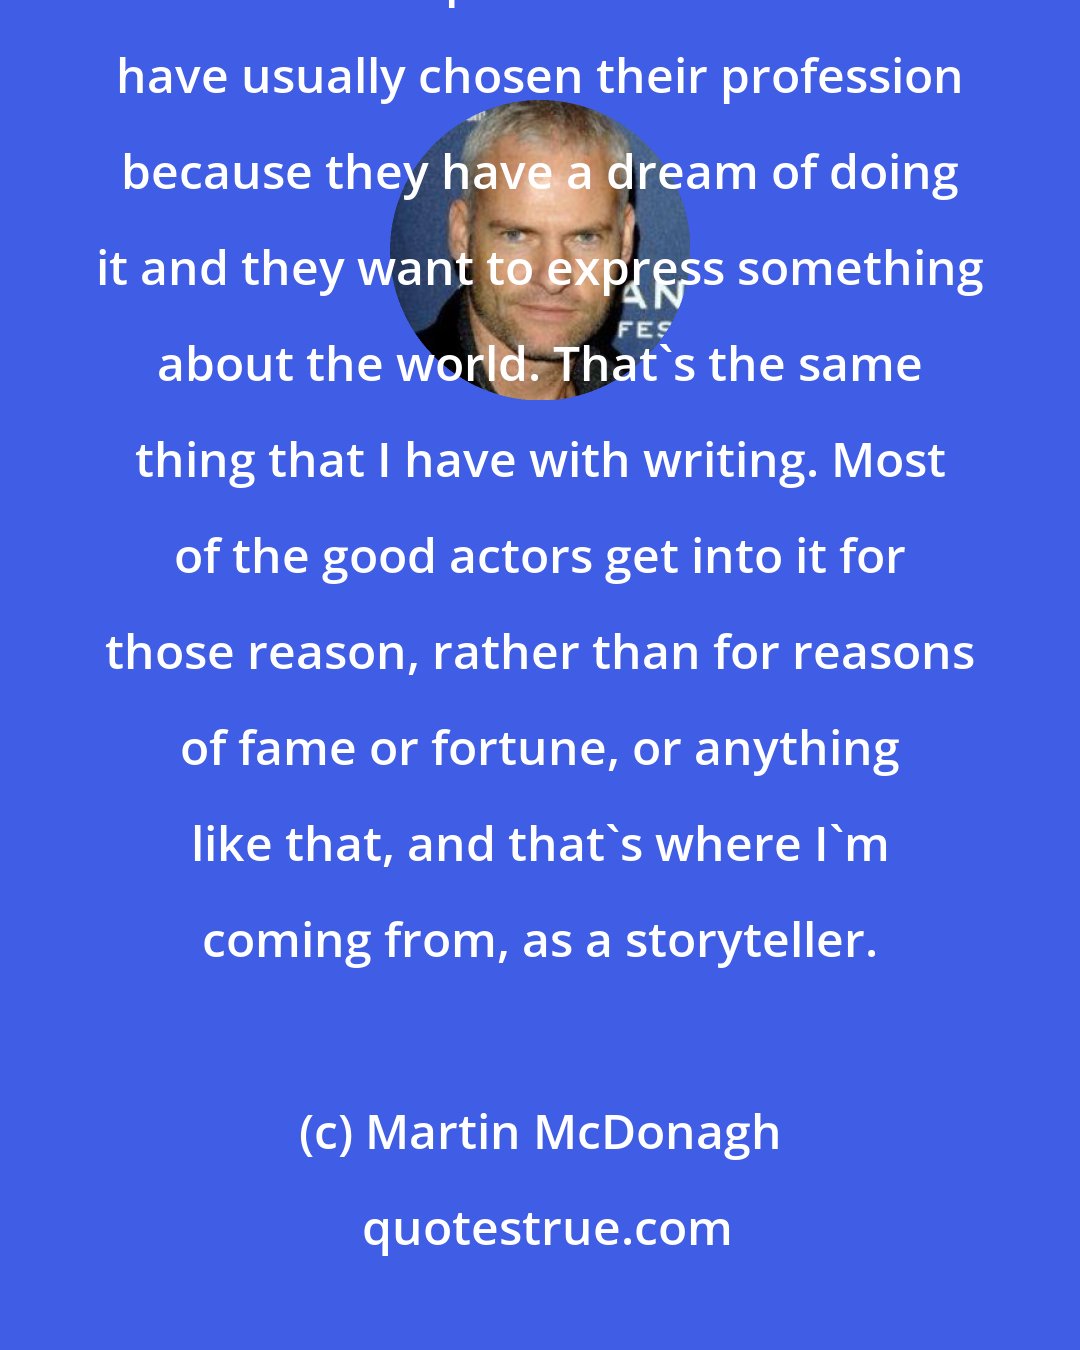 Martin McDonagh: I love actors. Part of that is my theater background and being a writer who cares about performance. Actors have usually chosen their profession because they have a dream of doing it and they want to express something about the world. That's the same thing that I have with writing. Most of the good actors get into it for those reason, rather than for reasons of fame or fortune, or anything like that, and that's where I'm coming from, as a storyteller.